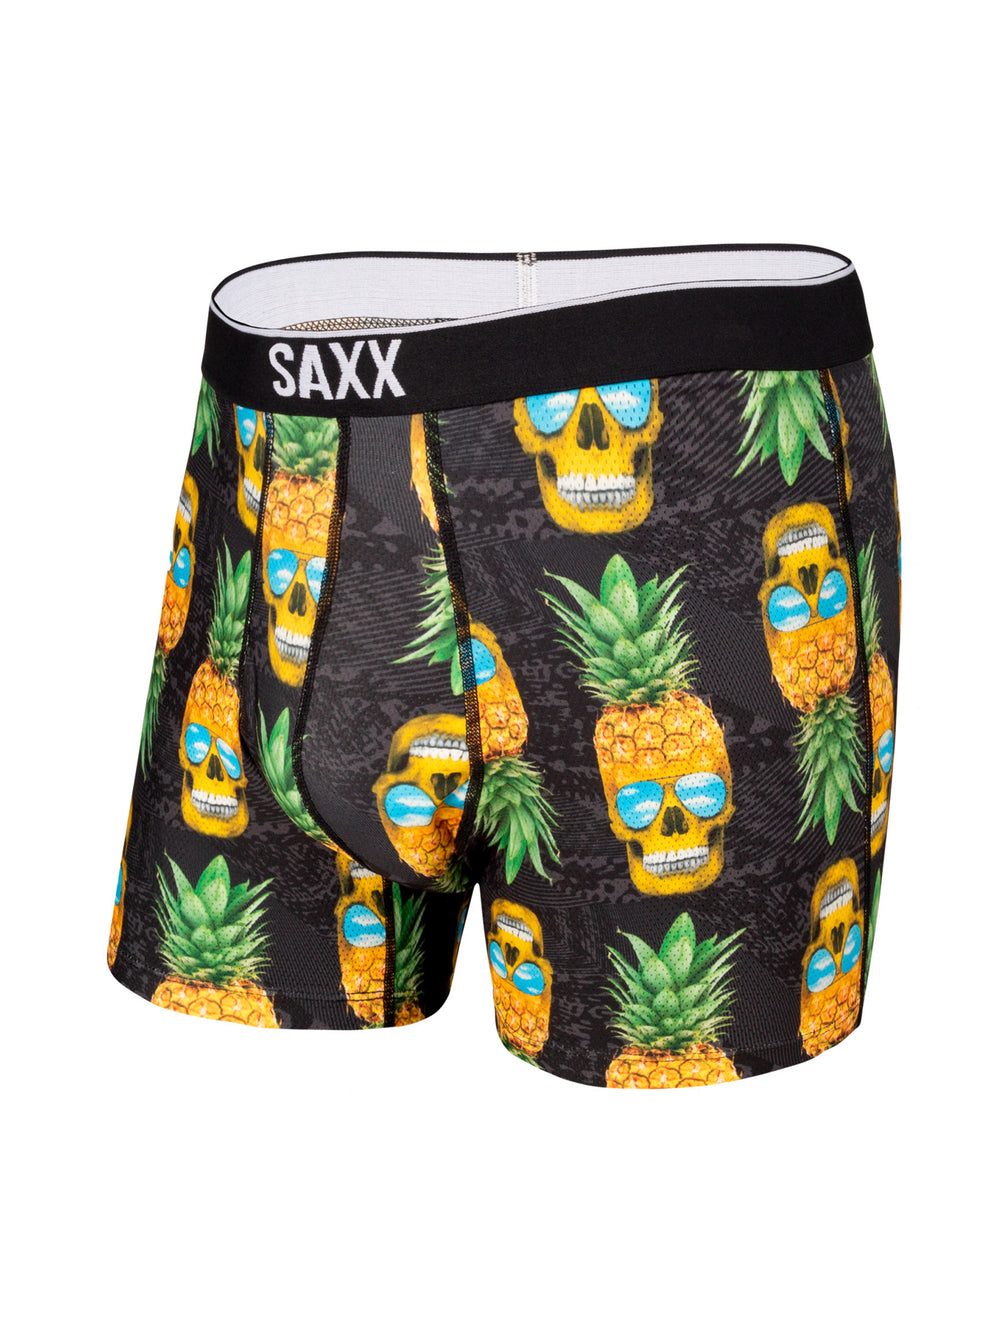 SAXX VOLT BOXER BRIEF - PINEAPPLE EXPRESS - CLEARANCE